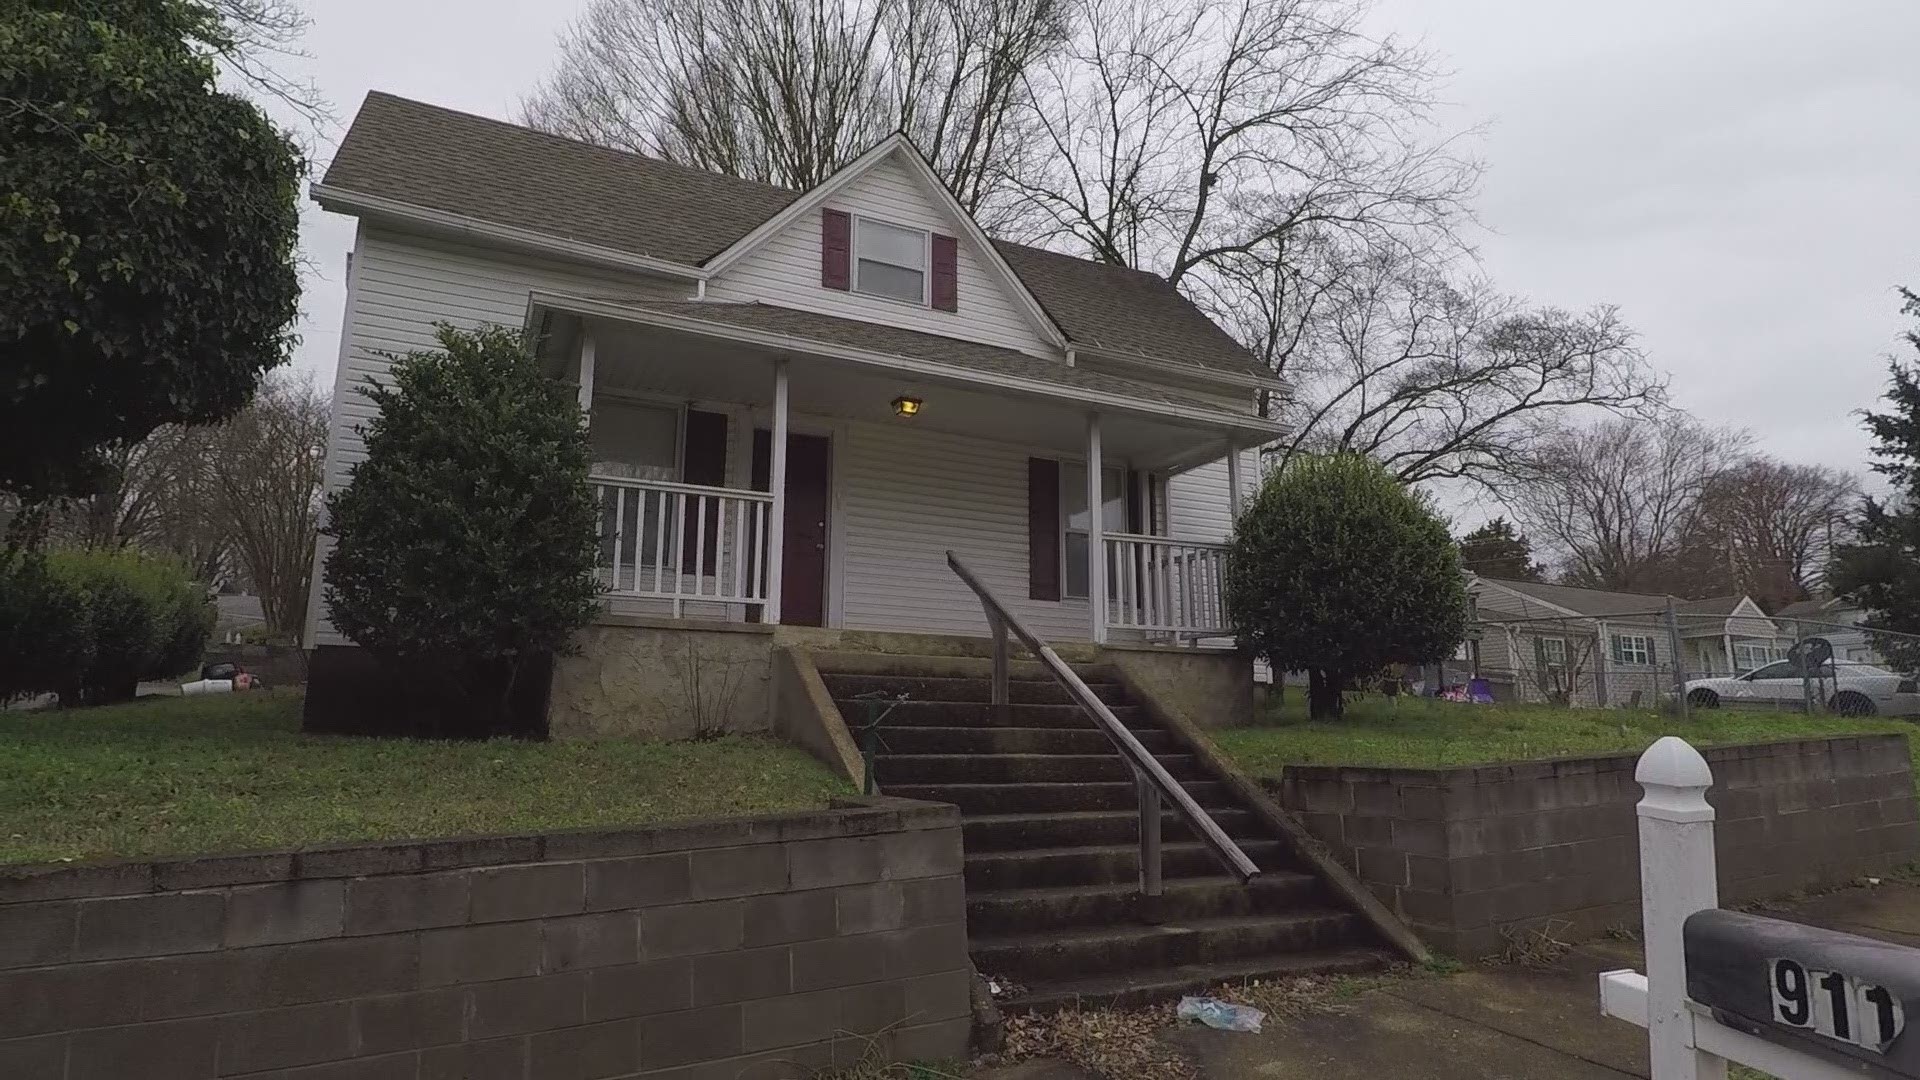 Officers with the Lenoir City Police Dept. & the 9th Judicial Drug Task Force executed search warrants at a home on 911 W. Broadway and a business at 400 E. Broadway